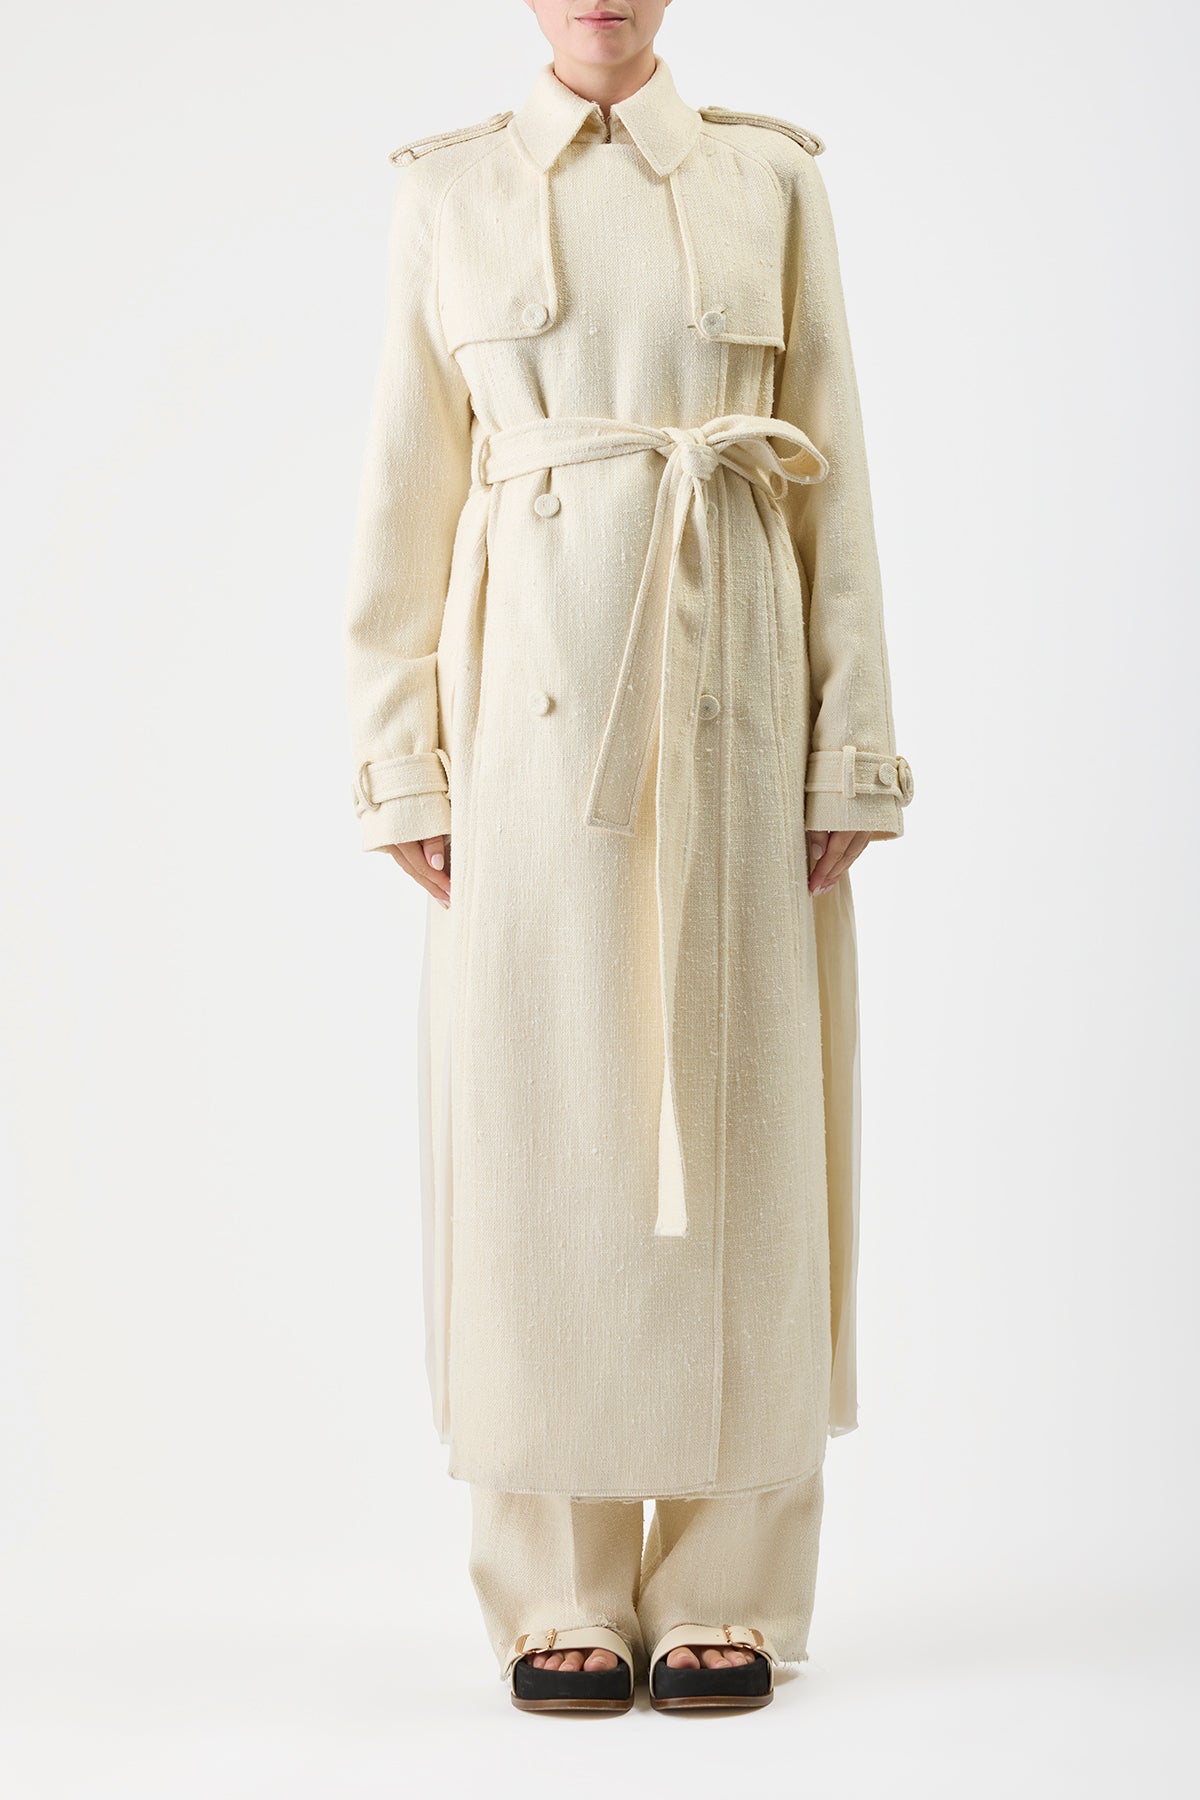 Eithne Trench Coat in Soft Silk Wool